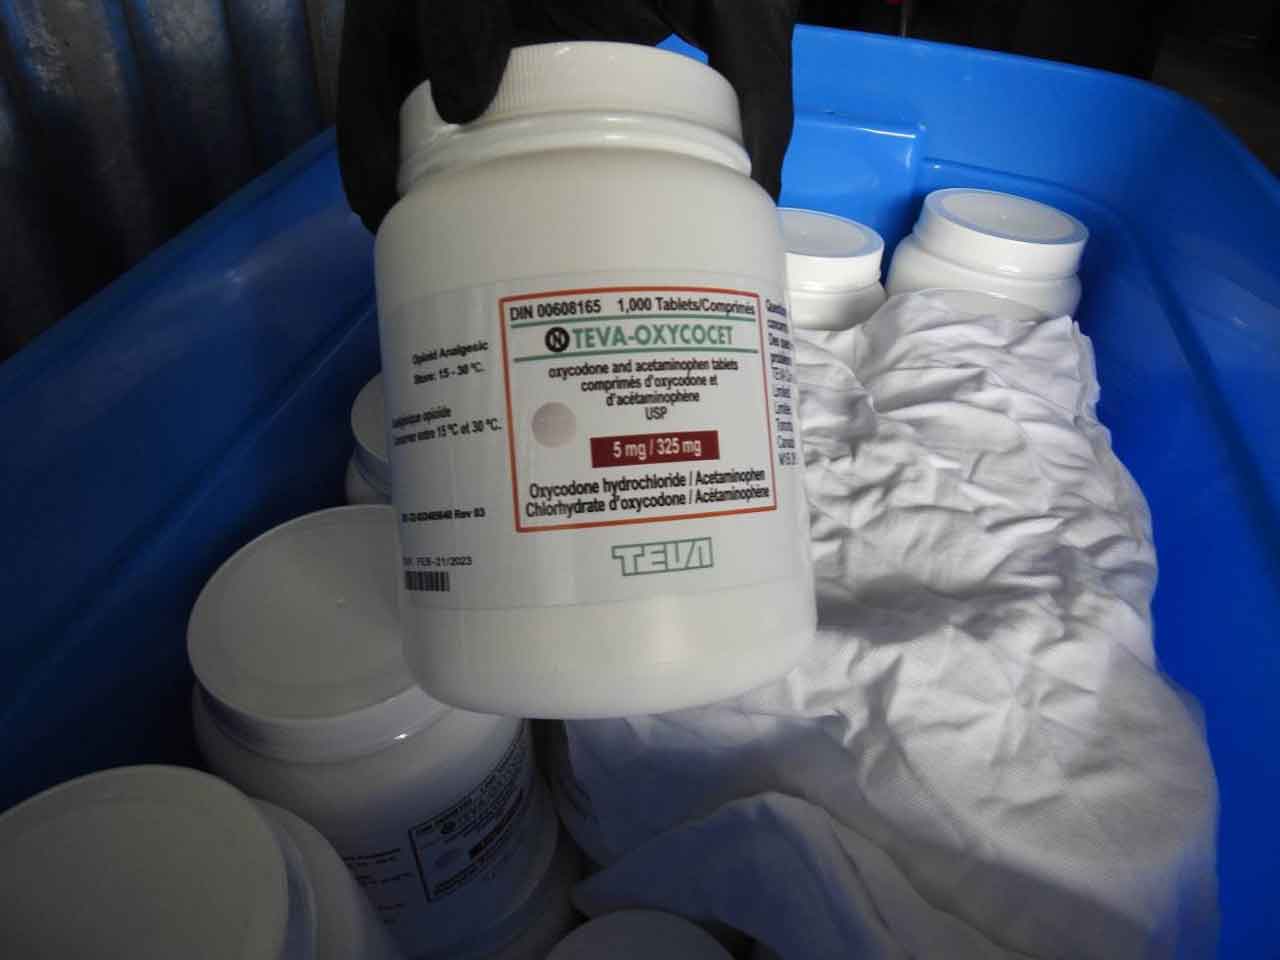 Close up of a counterfeit oxycocet bottle seized in Toronto, June 2020  (Source: OPP Handout)